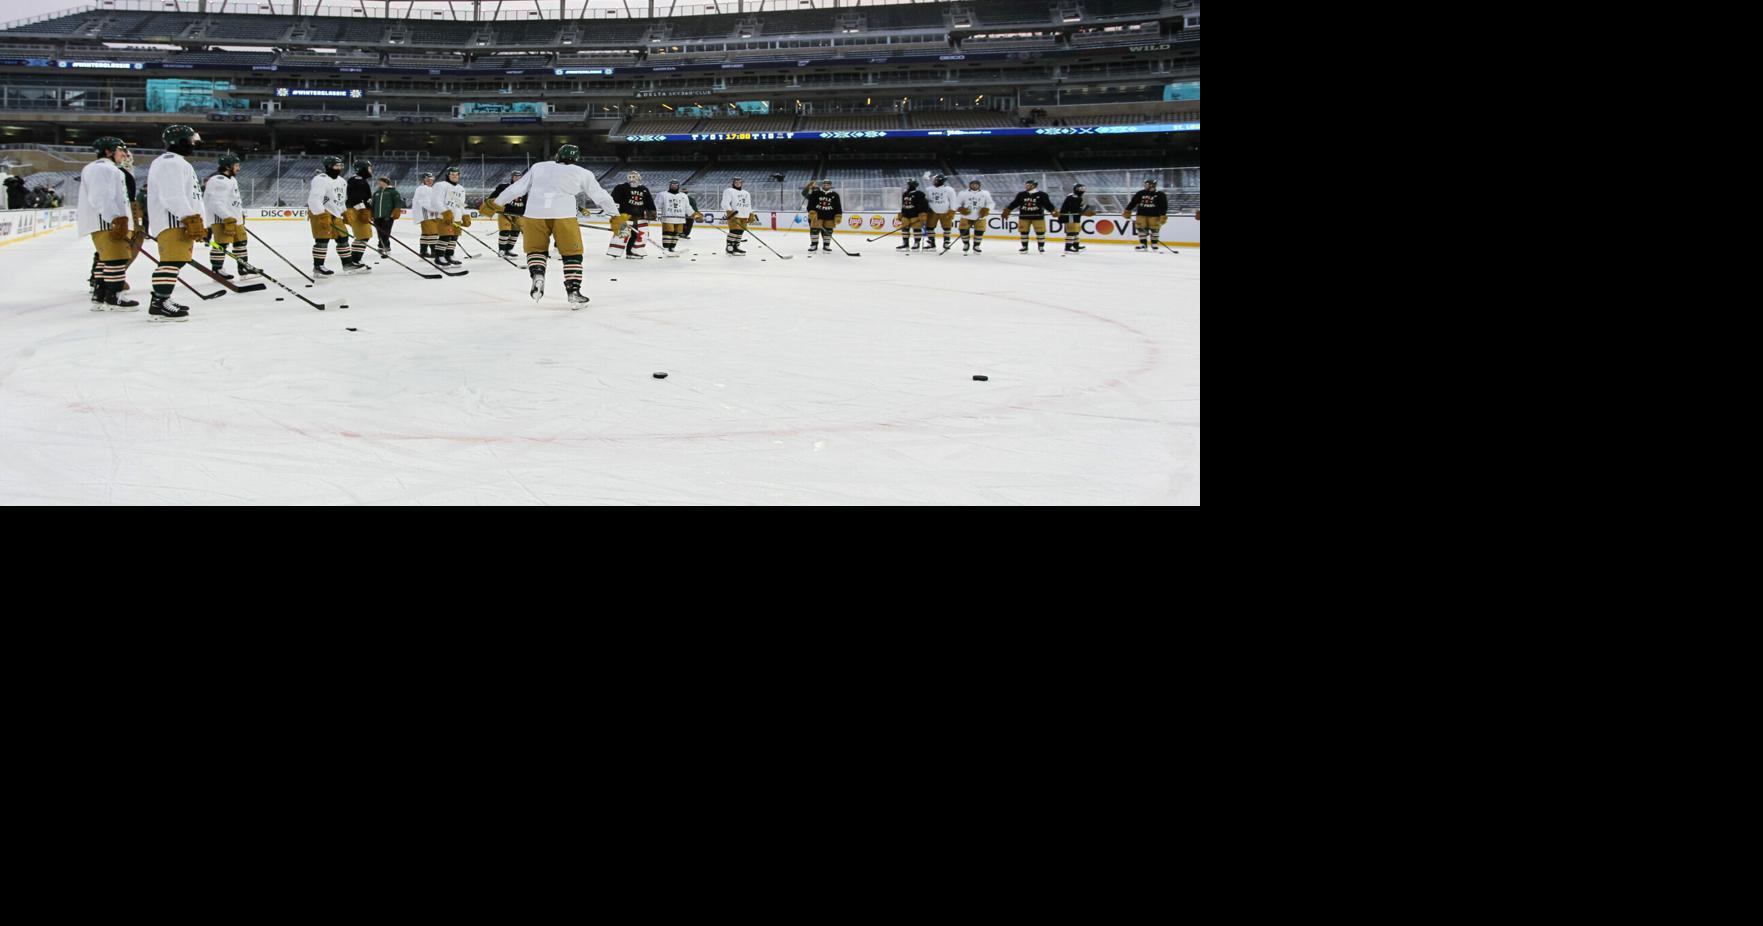 Wild-Blues Winter Classic could be one of coldest outdoor games in NHL  history